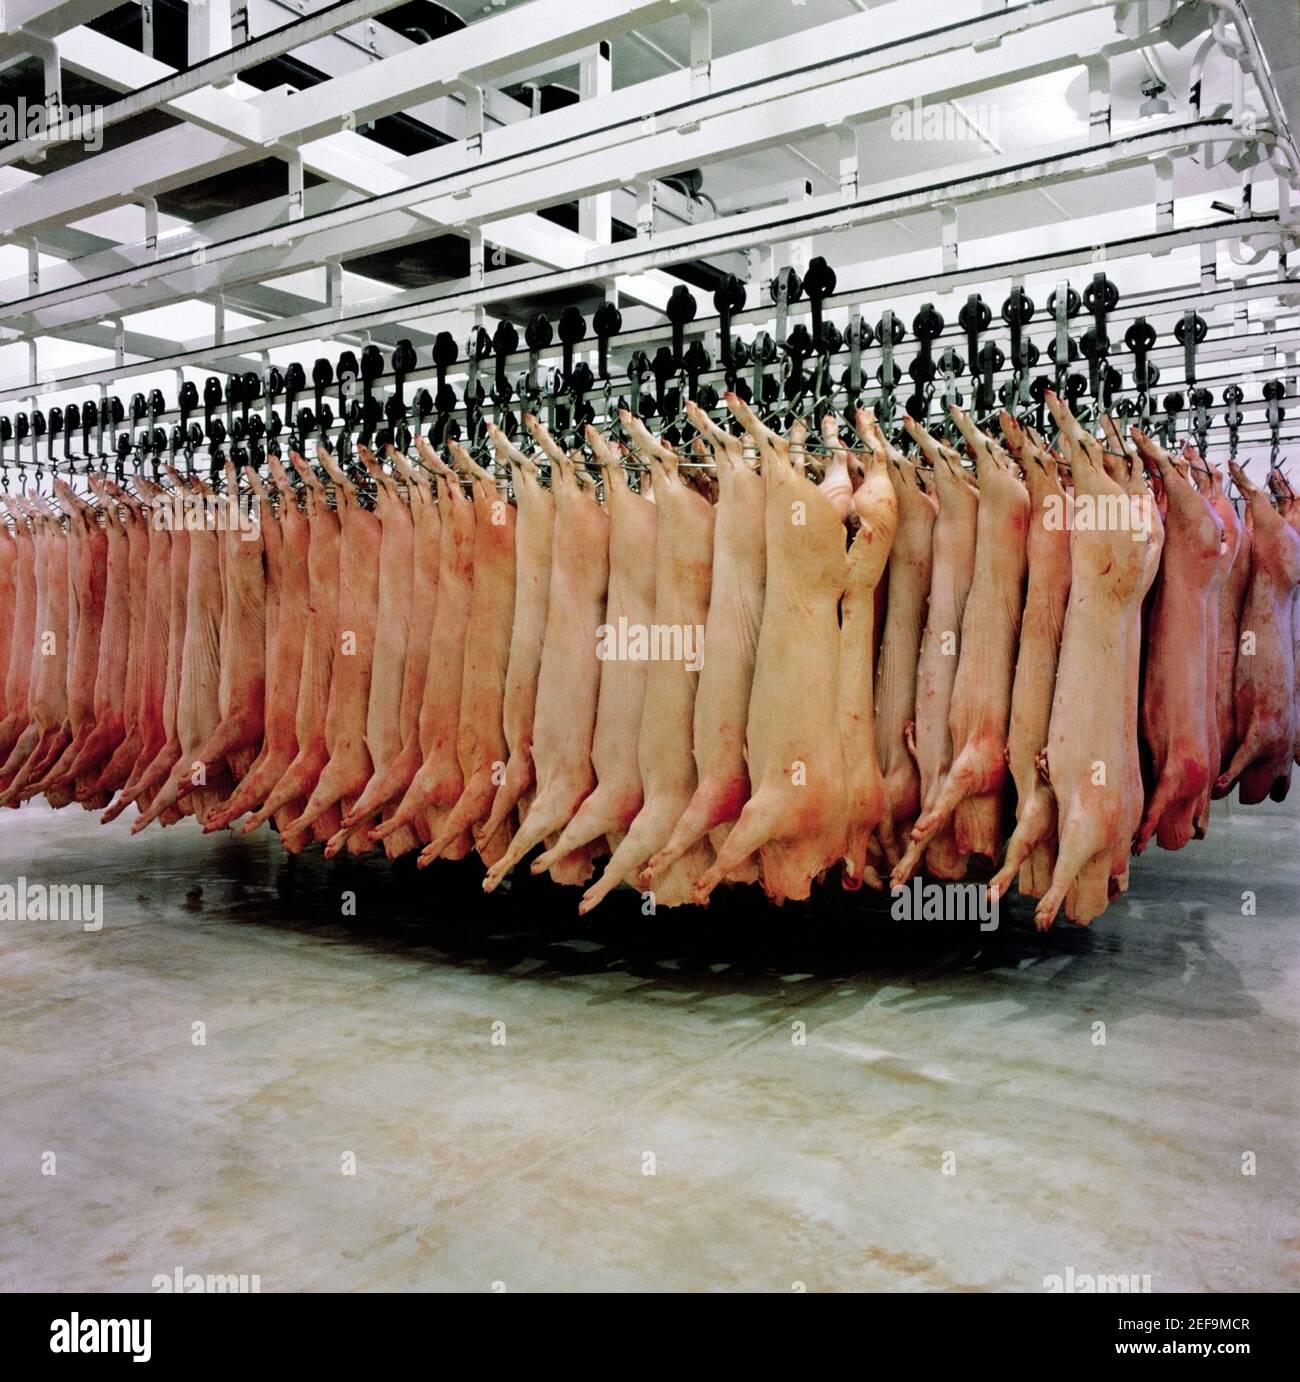 Skinned pigs hanging in a slaughterhouse Stock Photo